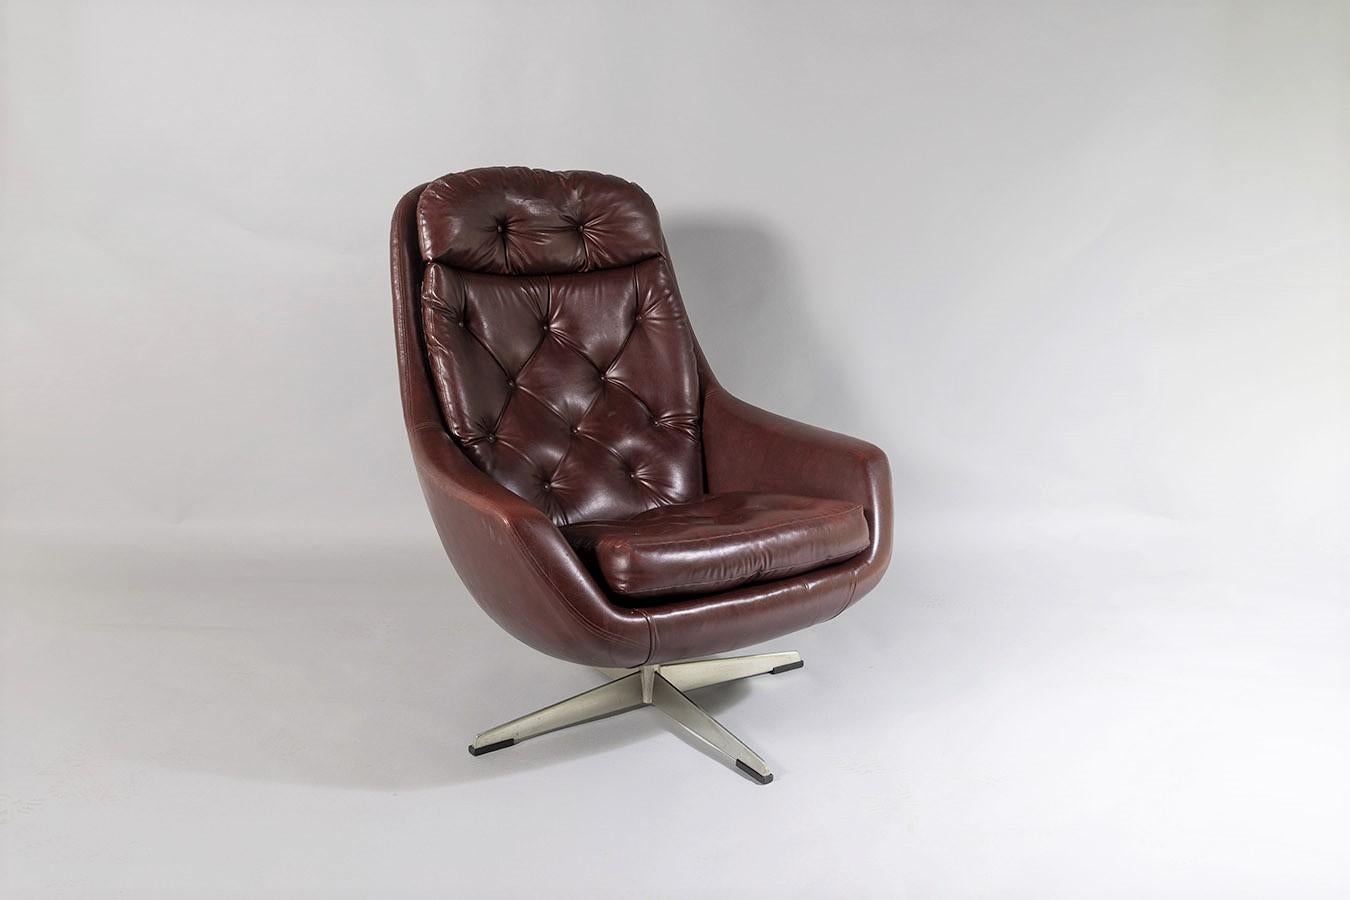 A mid century 1960s swivel egg armchair in a dark reddish brown faux leather.
Button back removable seat and backrest cushion in very good original condition.  The chair sits on a satin chrome metal base which still retains all four black nylon